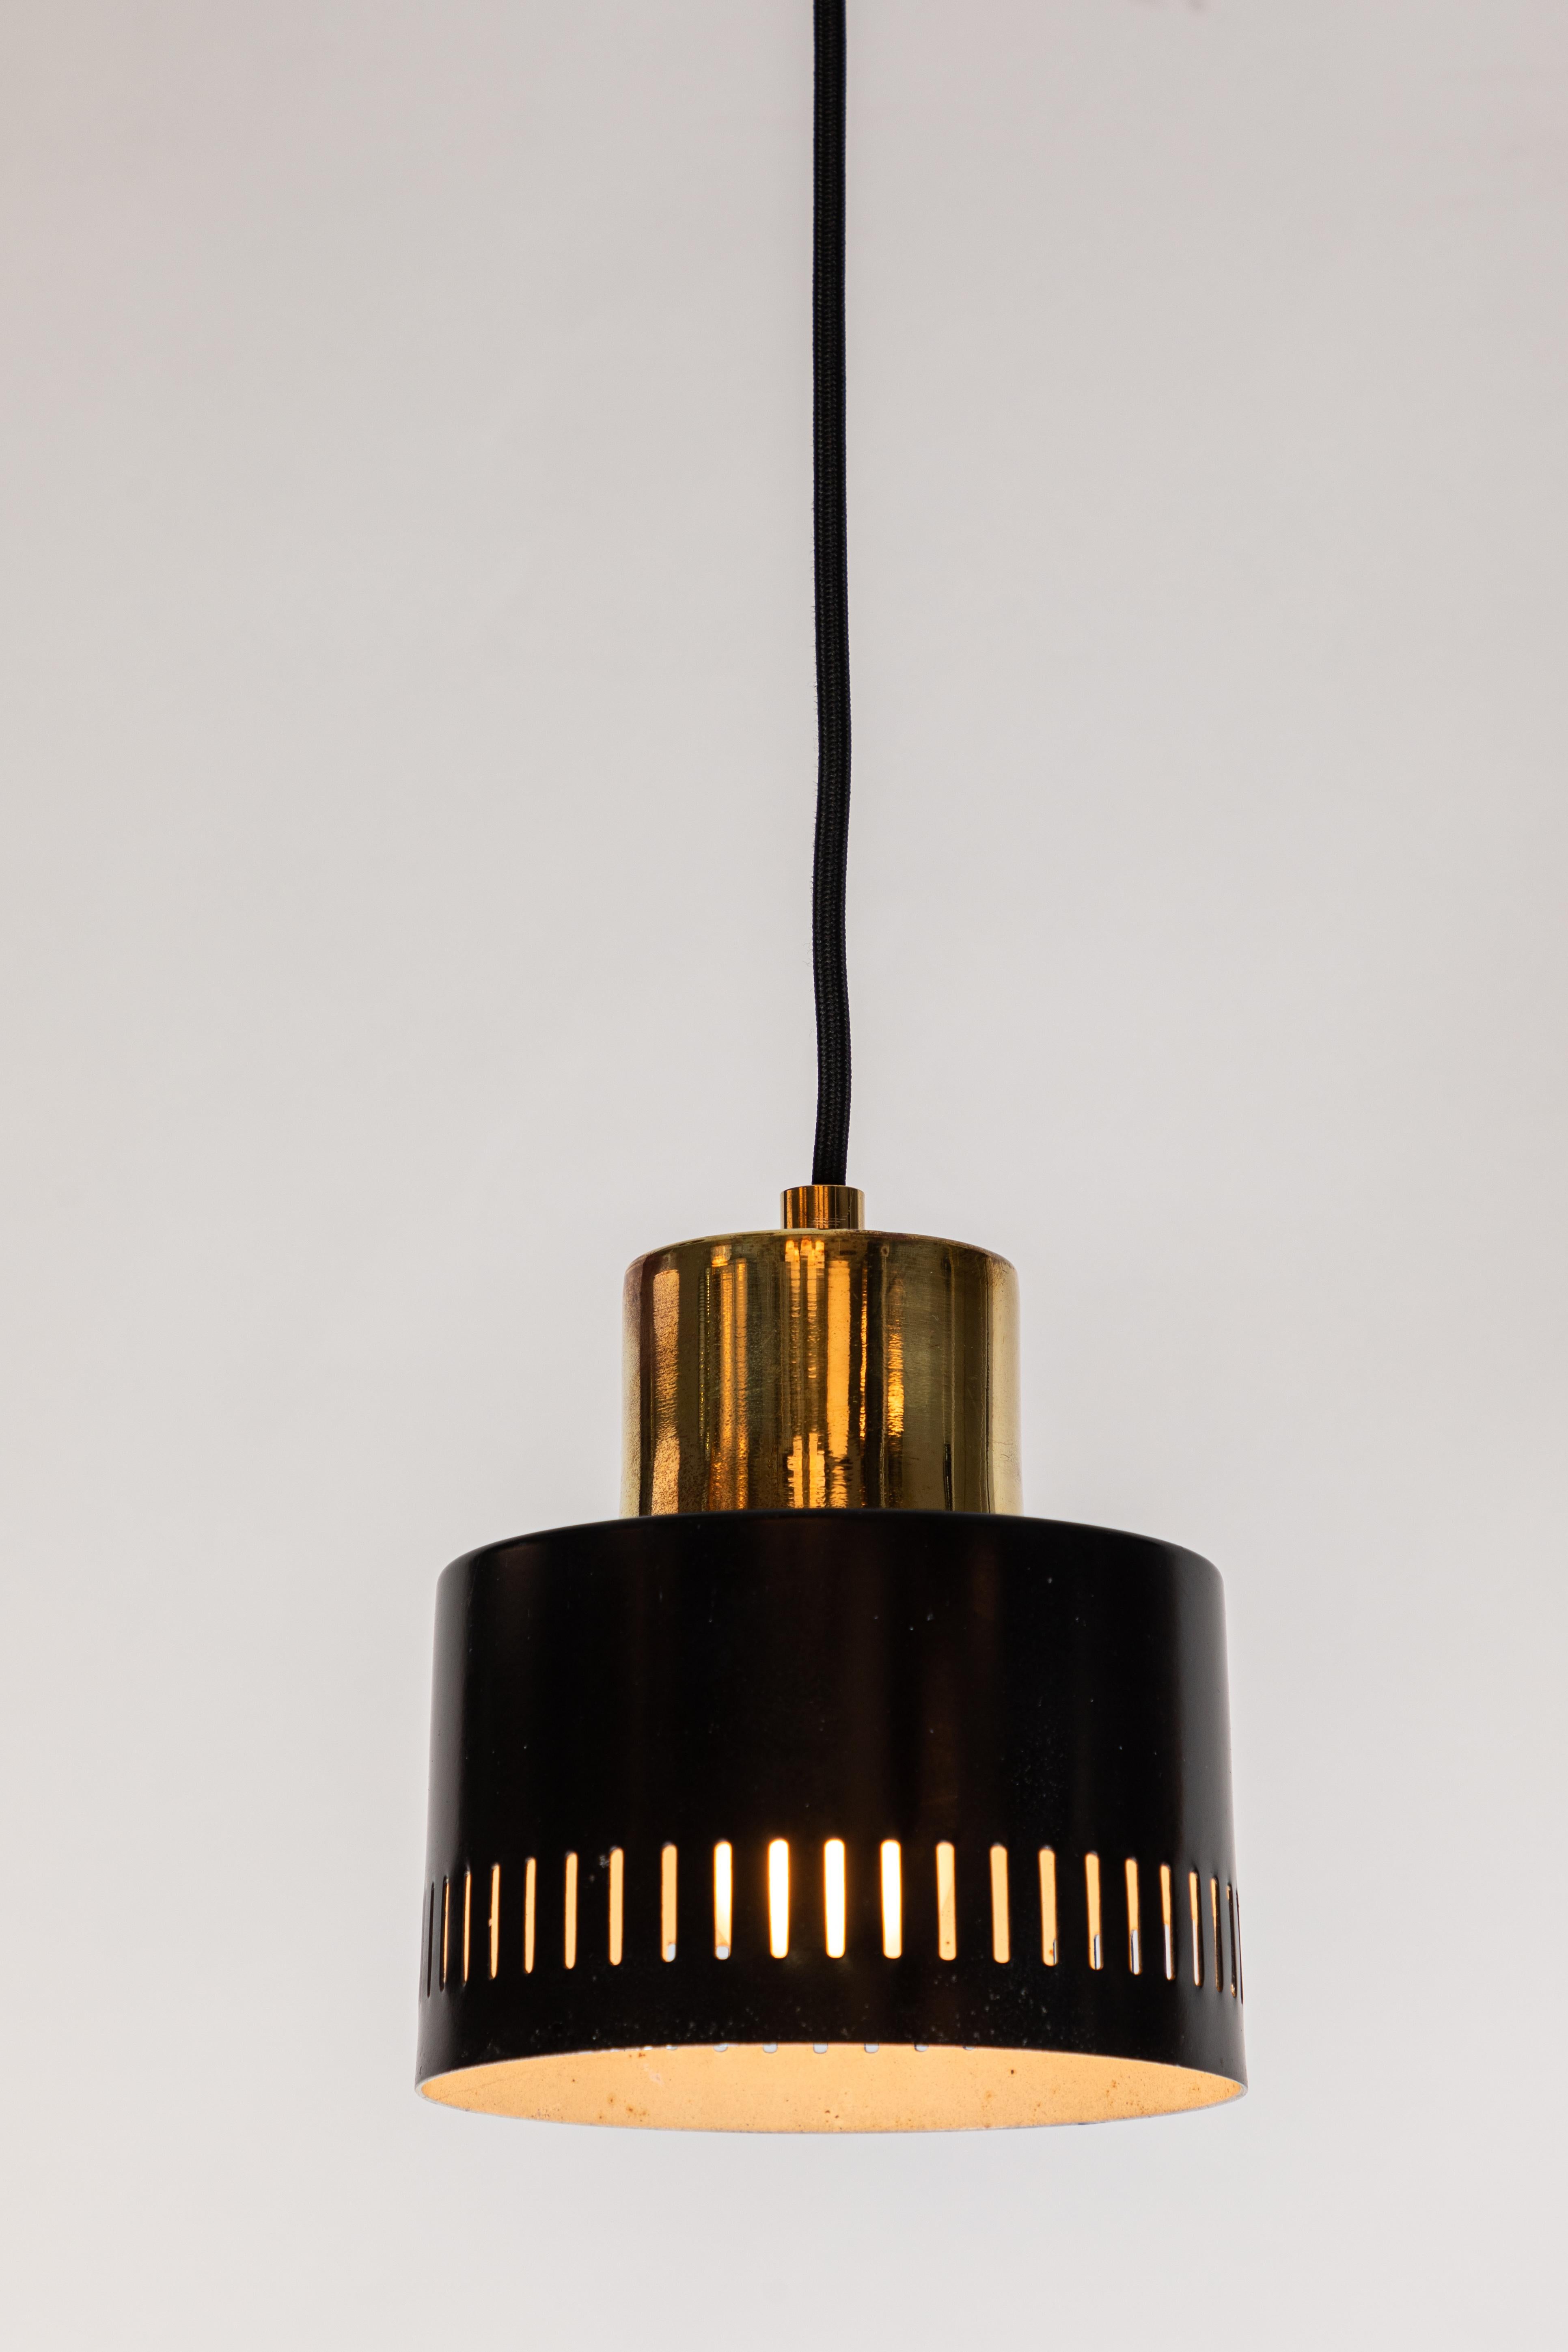 Mid-20th Century 1950s Italian Pendant in Black and Brass Attributed to Stilnovo